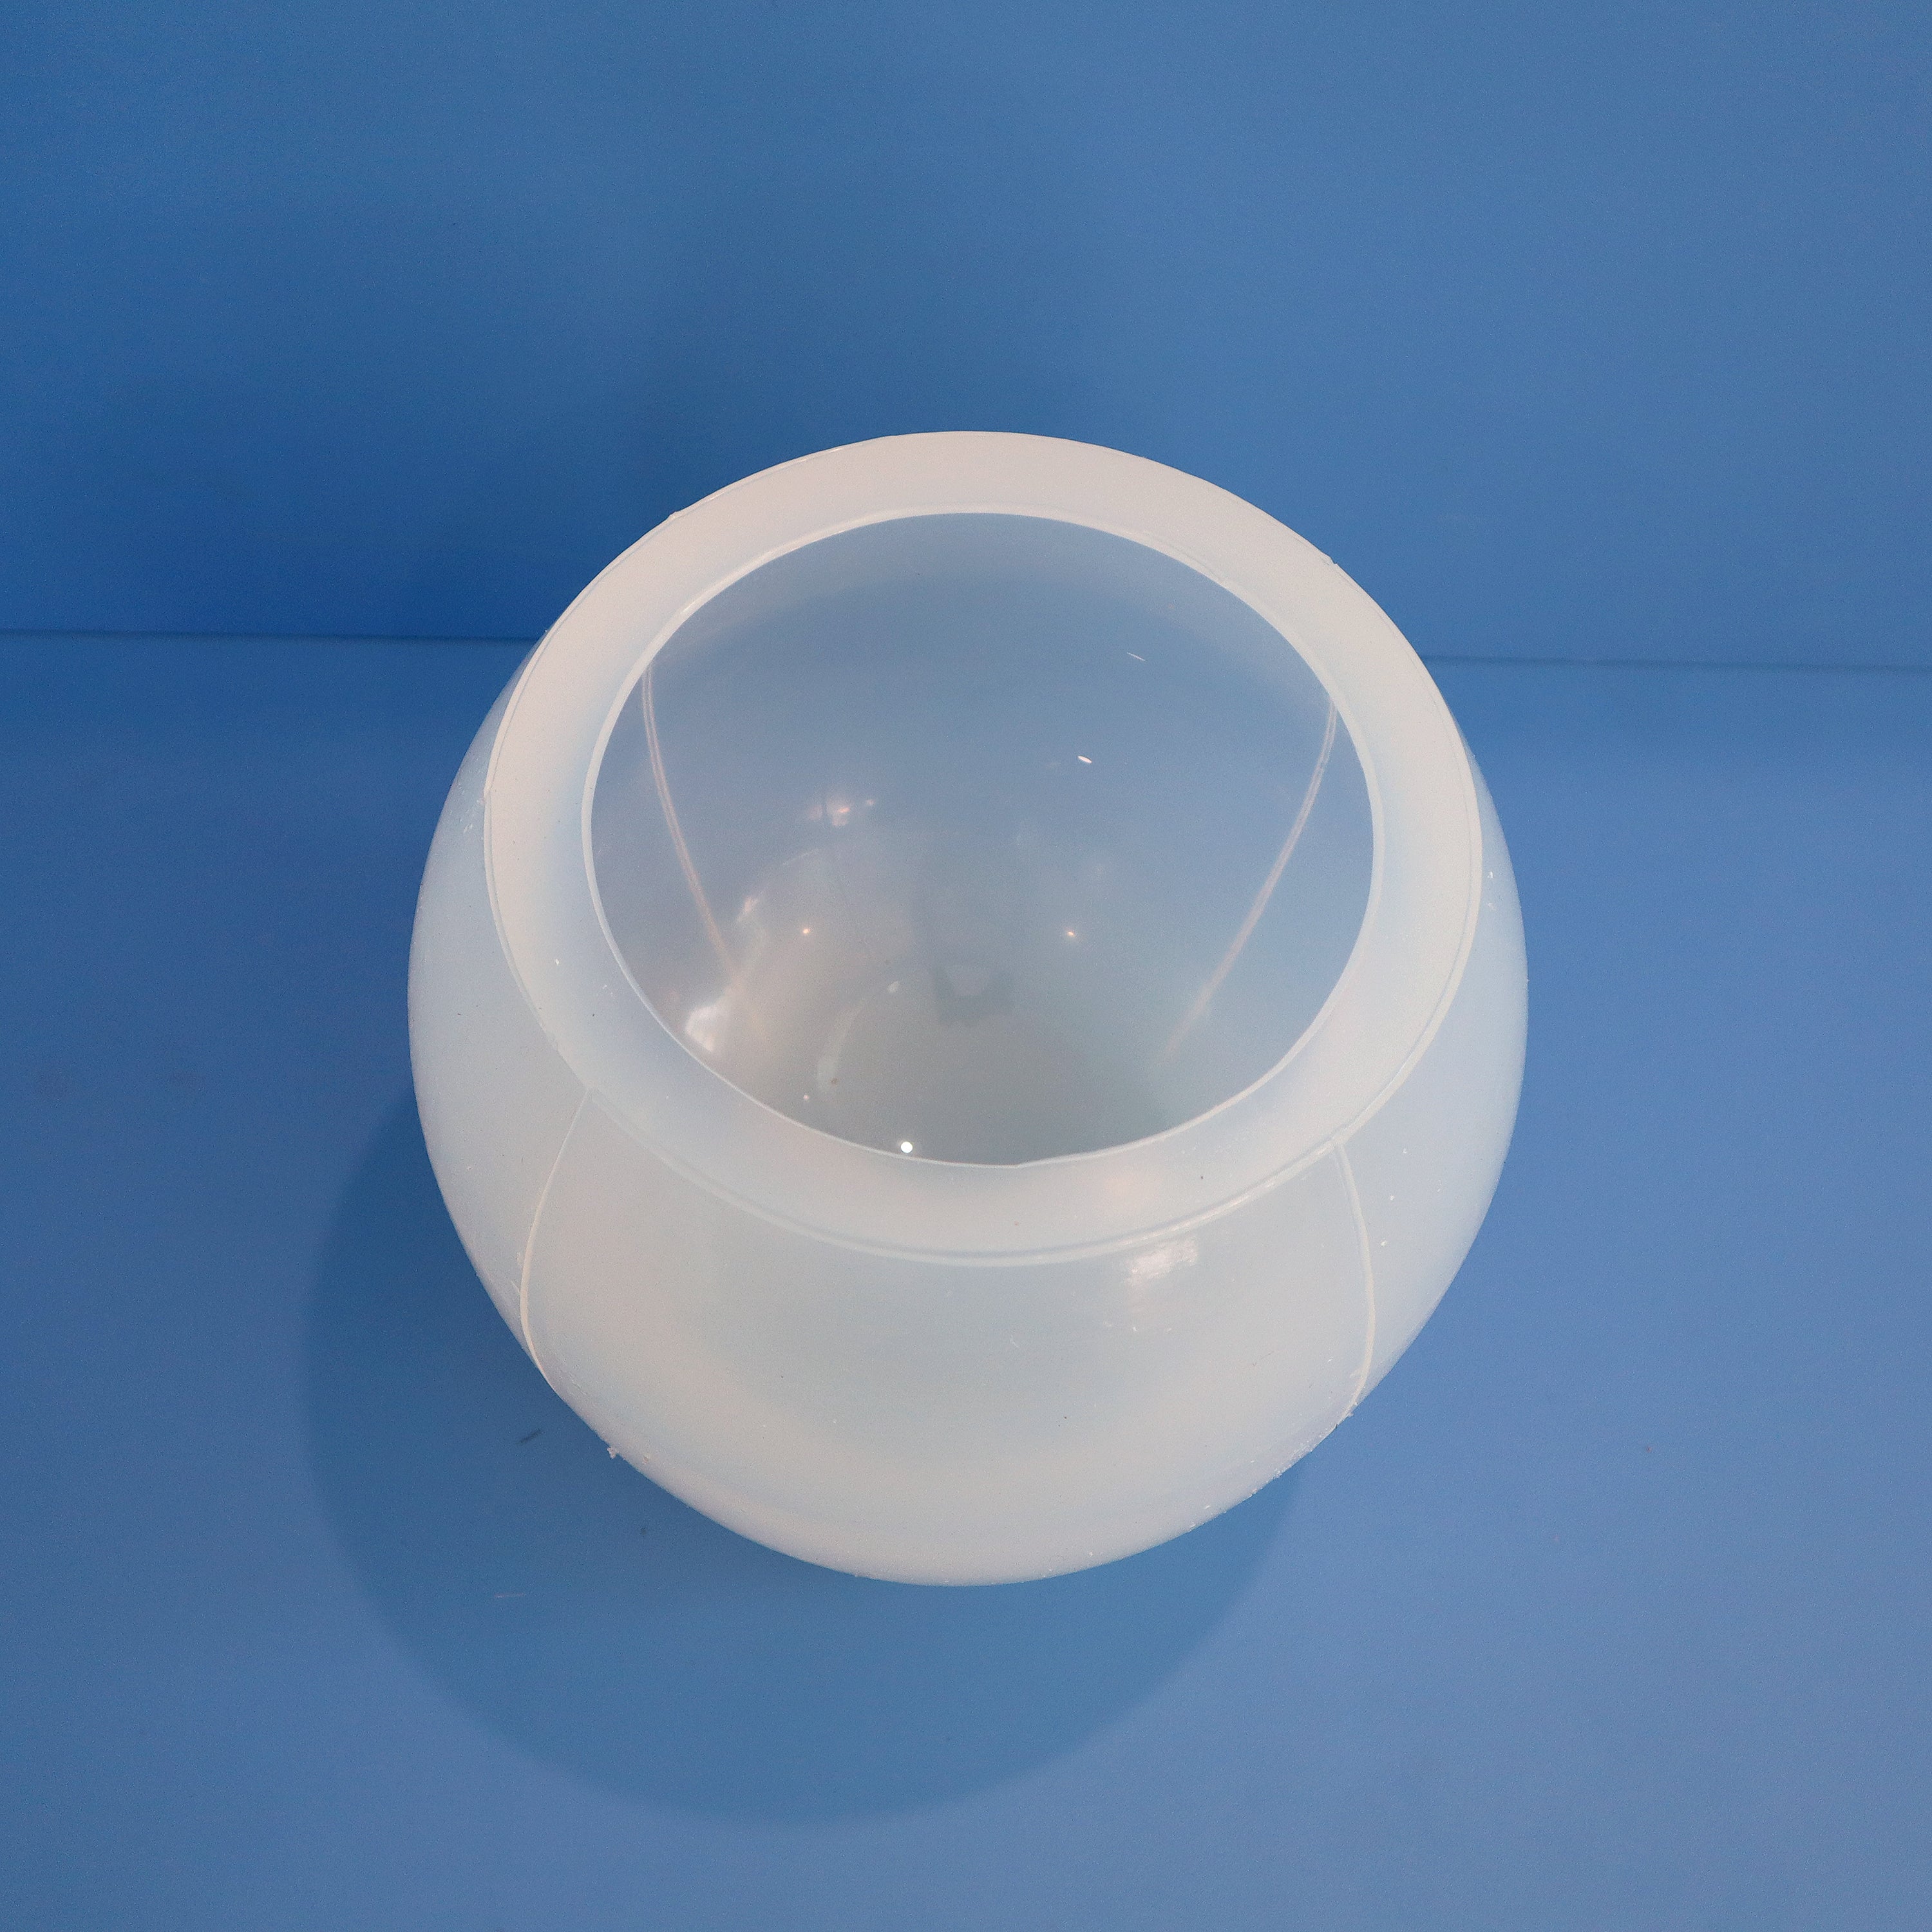 Clear Silicone 8" Sphere Mold